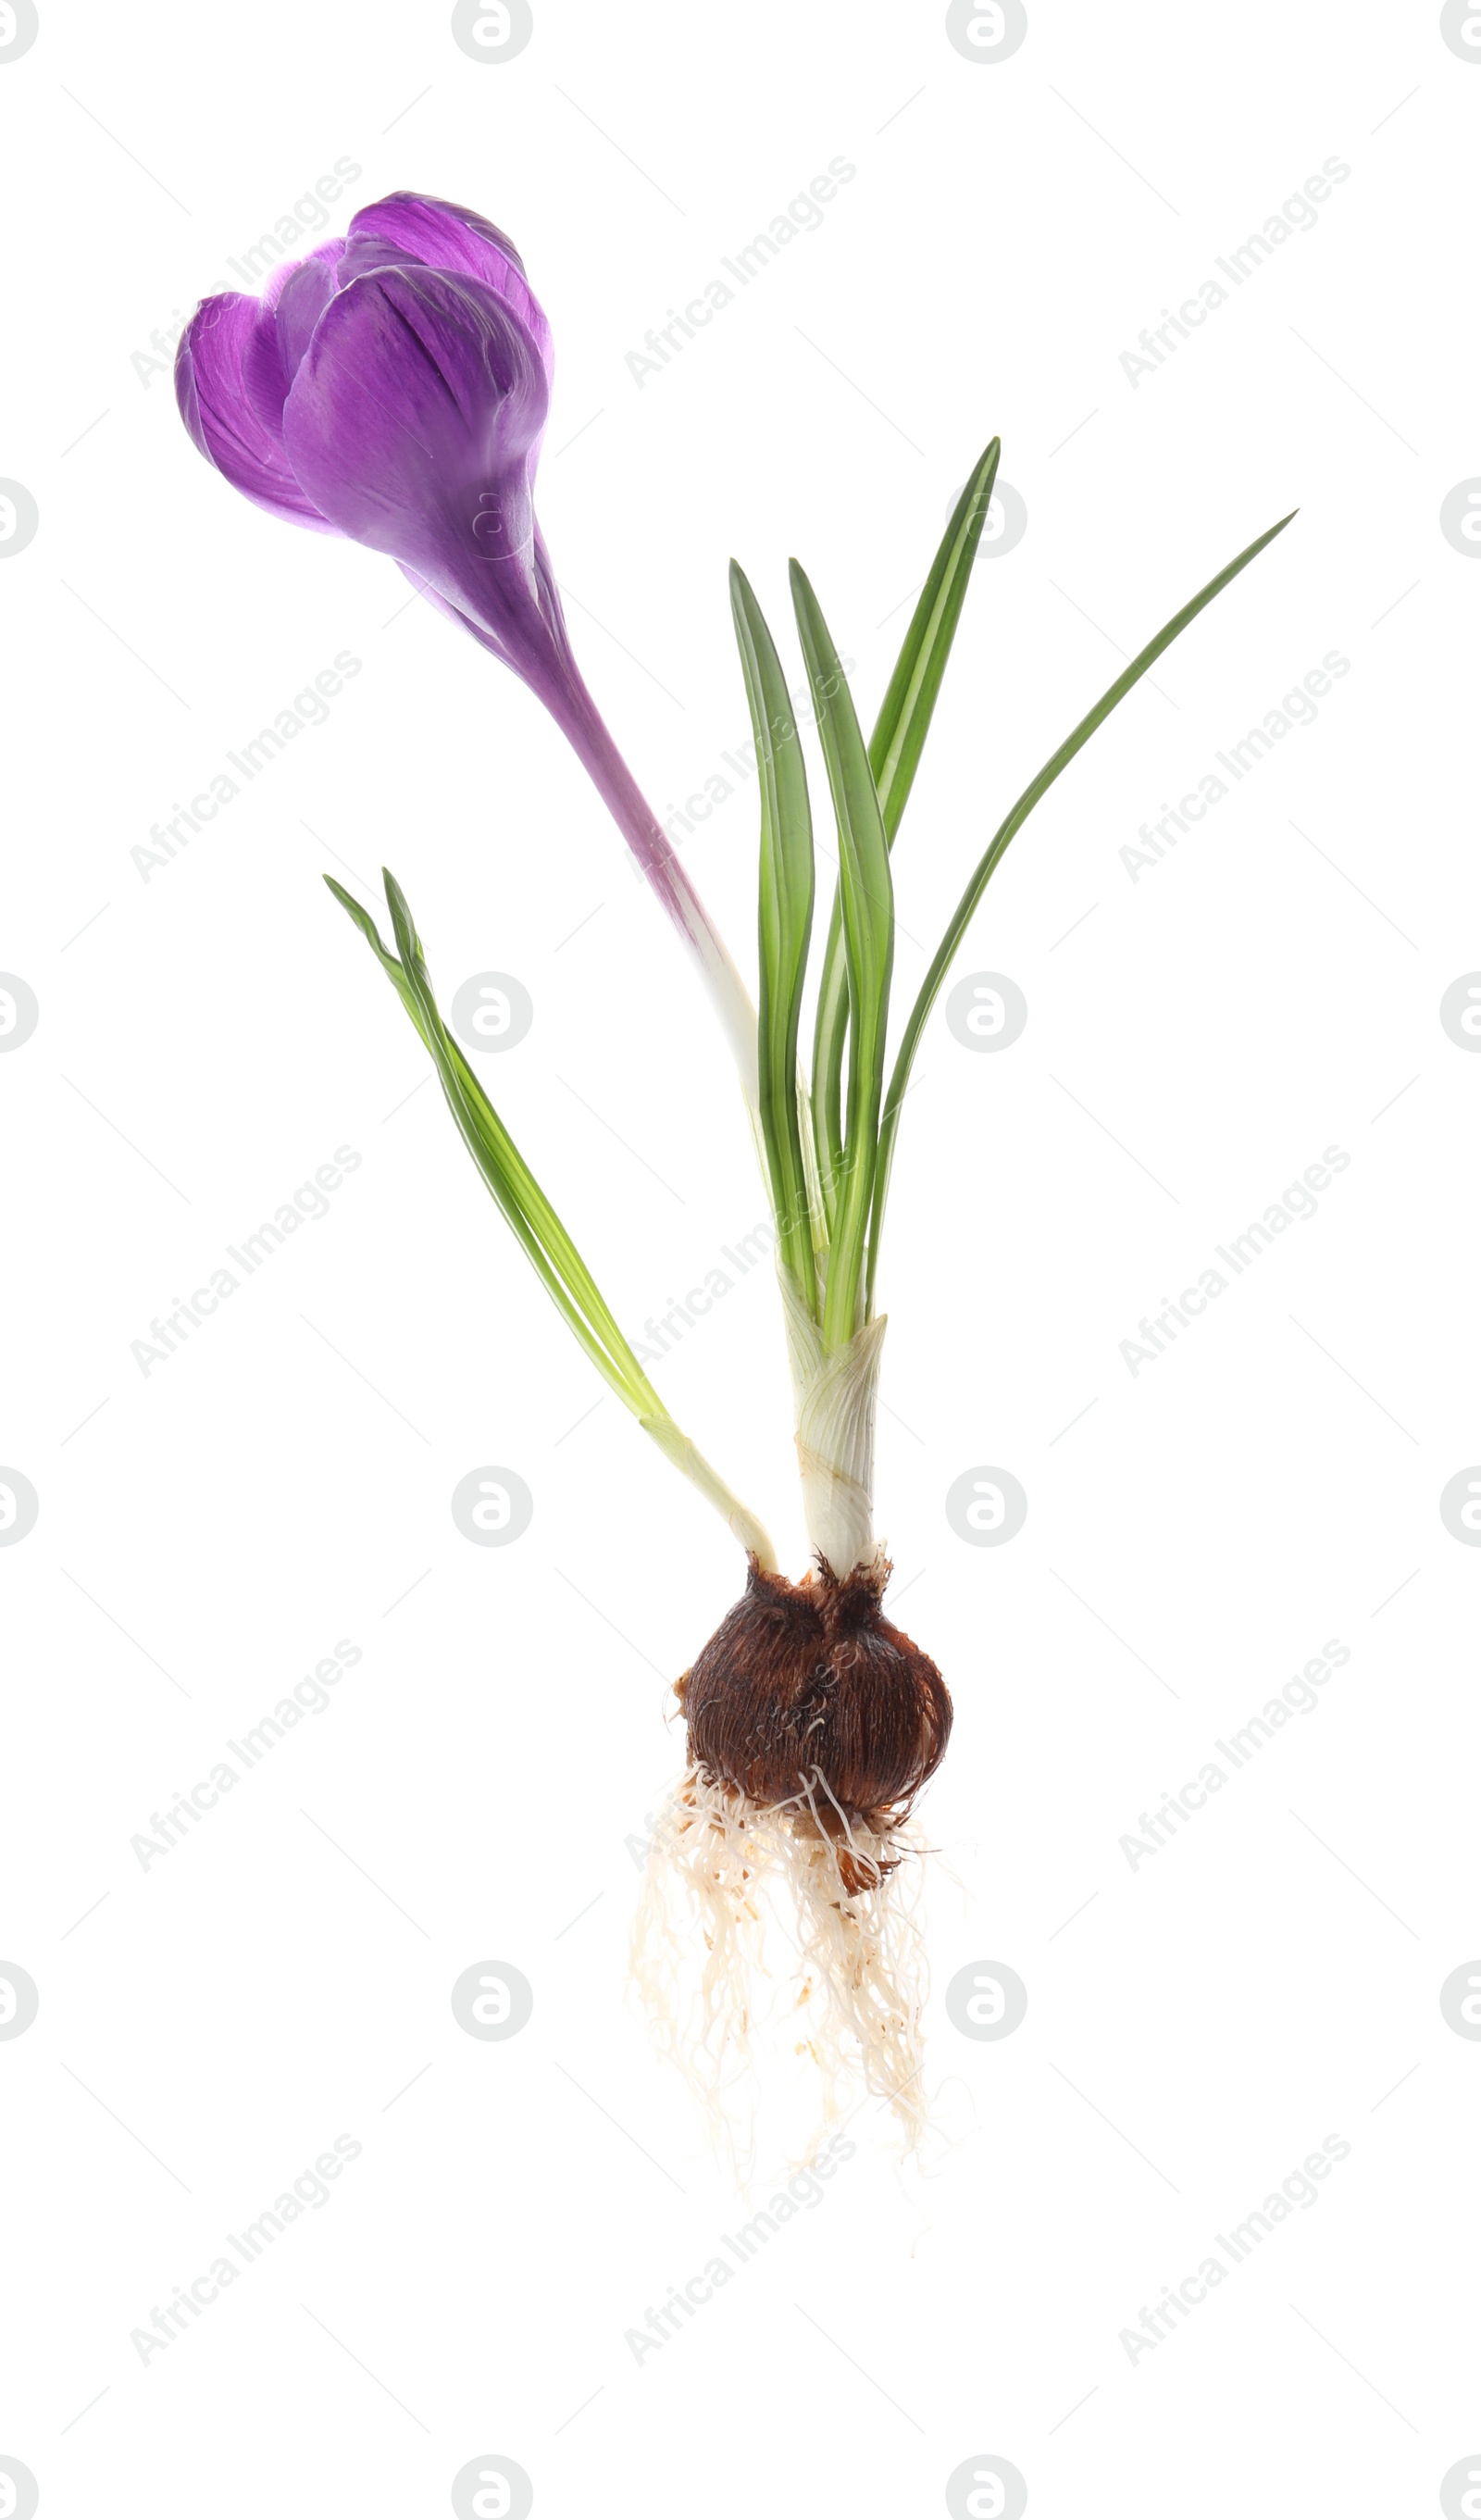 Photo of Crocus plant with purple flower isolated on white